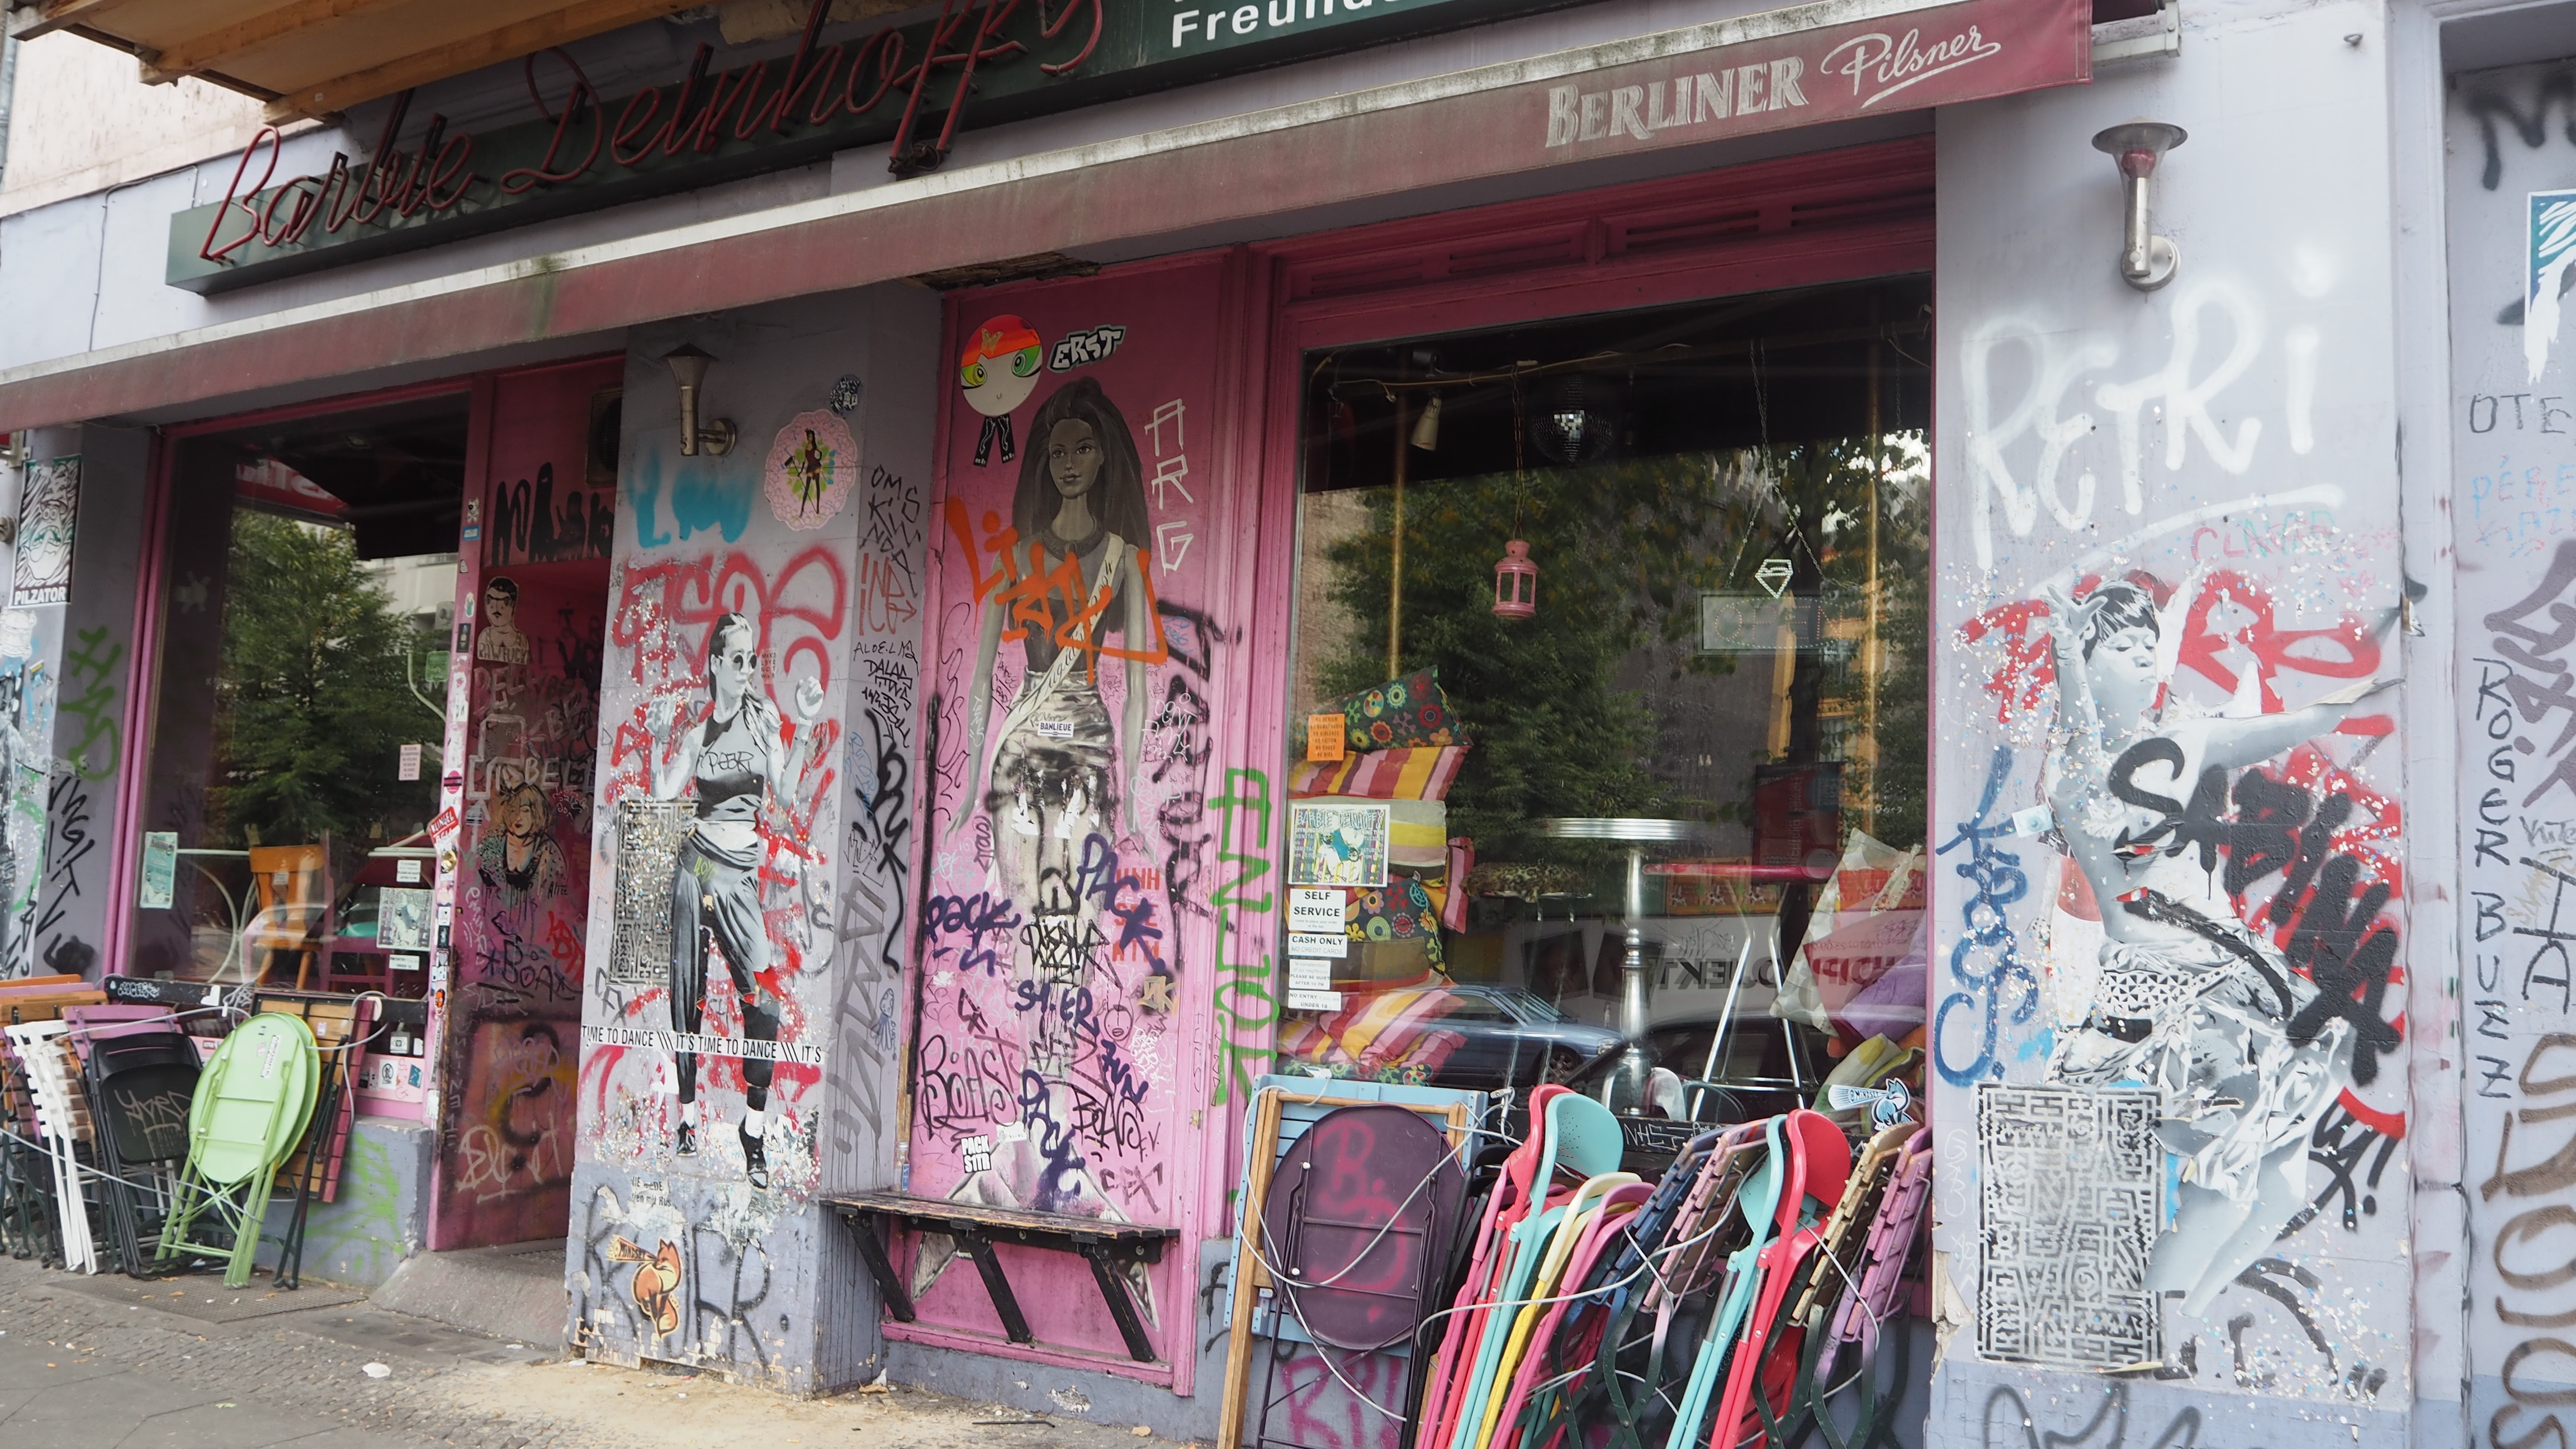 A pink cafe covered in street art, with black and white women painted on the walls 